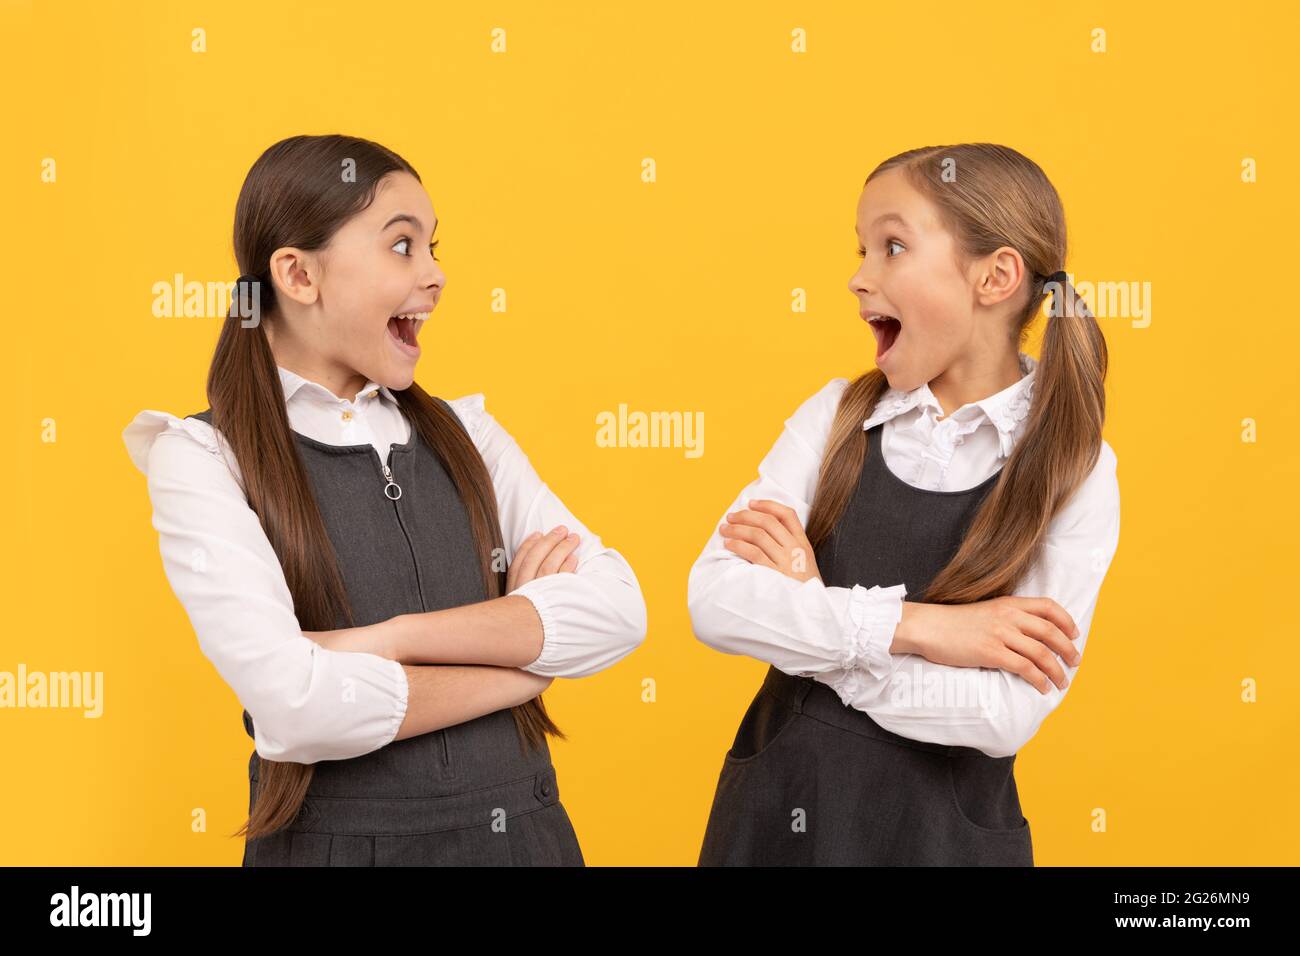 Surprised little kids look at each other with open mouths in formal school uniforms, surprise Stock Photo